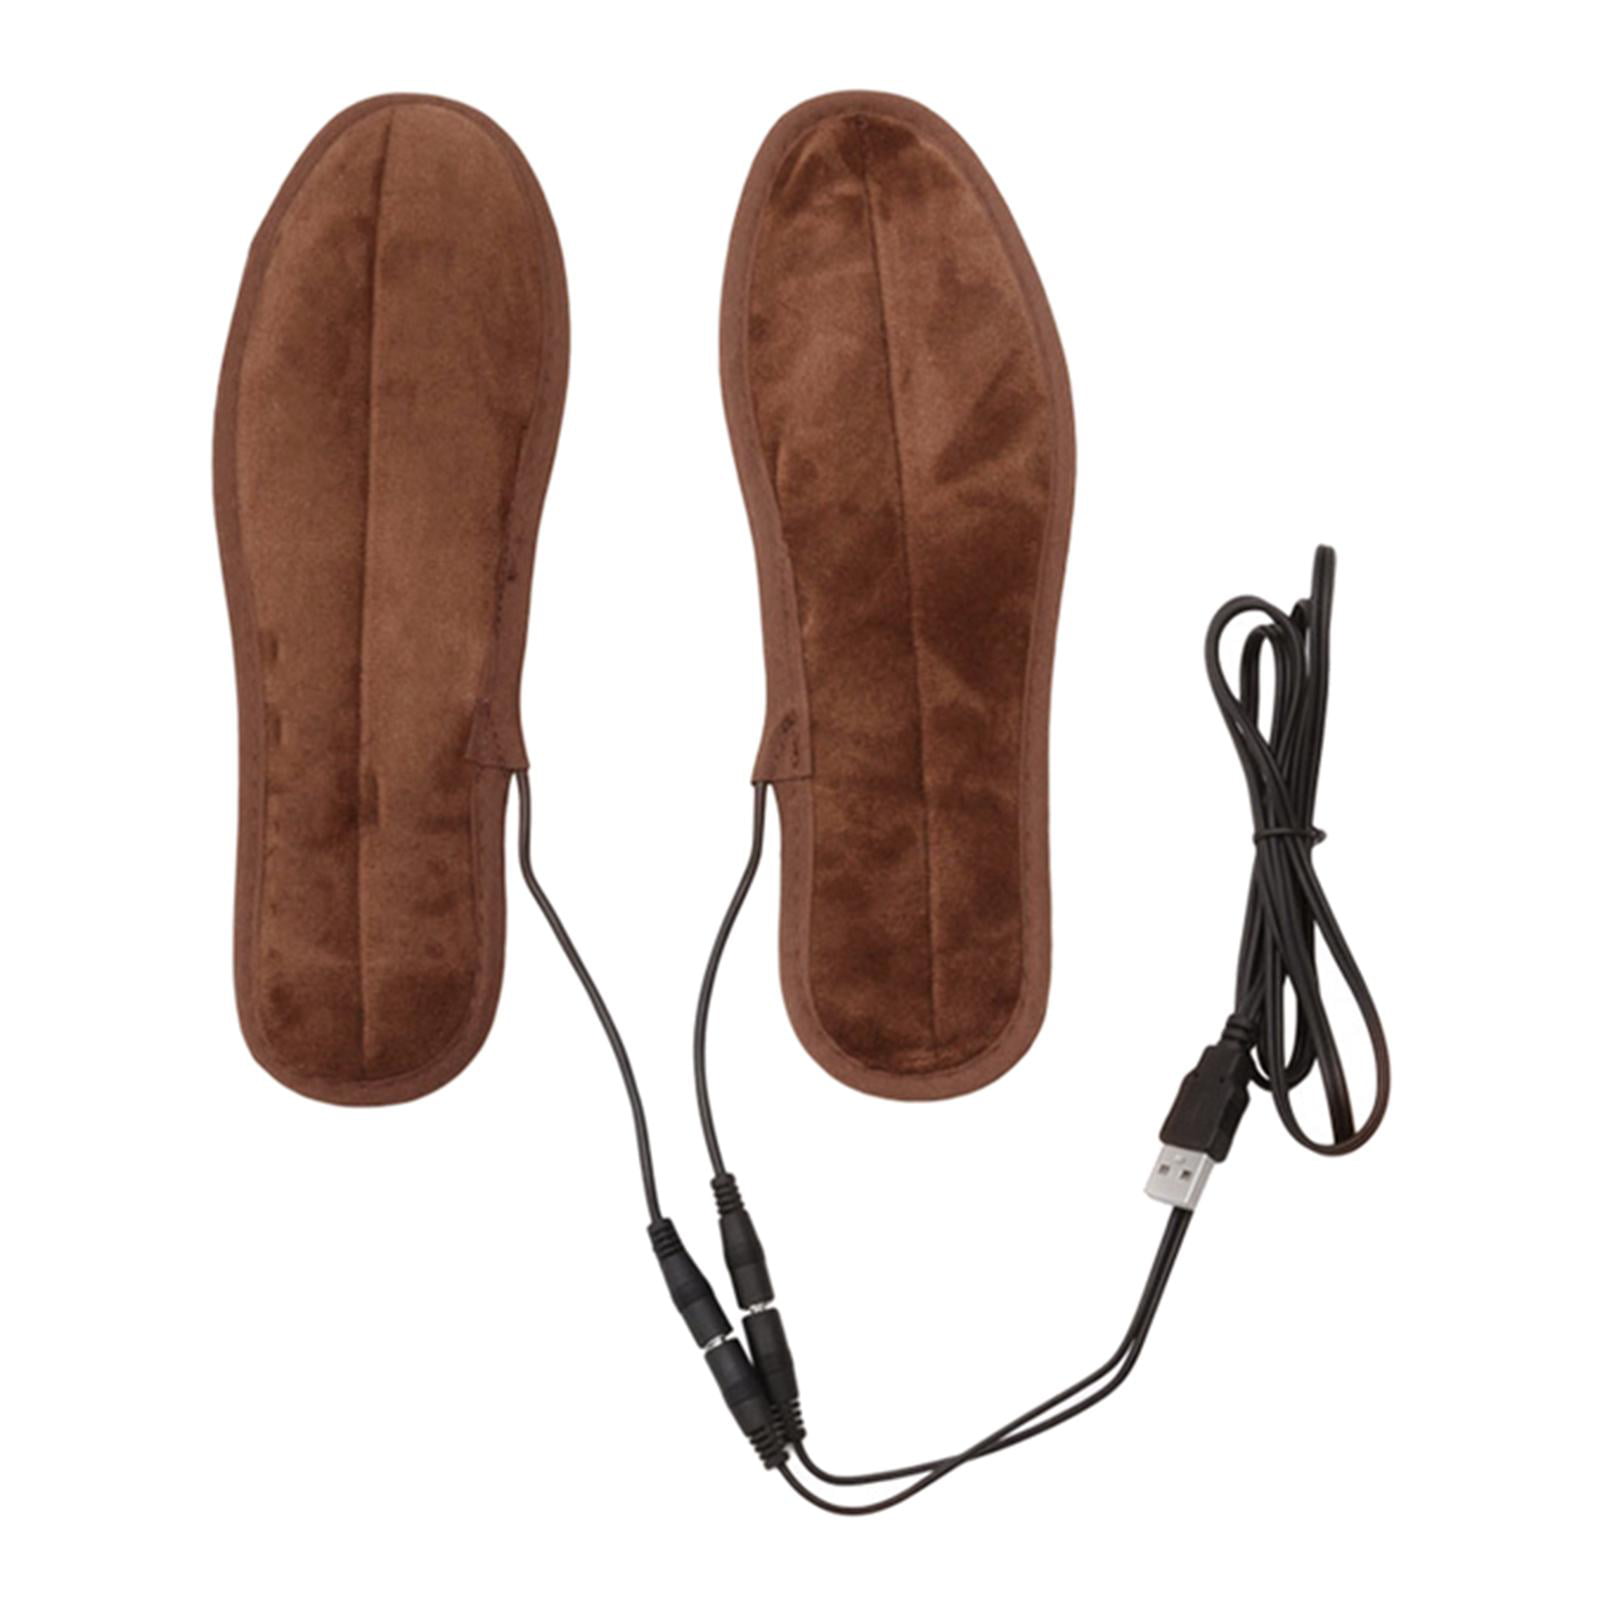 Electric Heated Insoles USB Rechargeable Foot Warmer Winter Outdoor Feet Heater